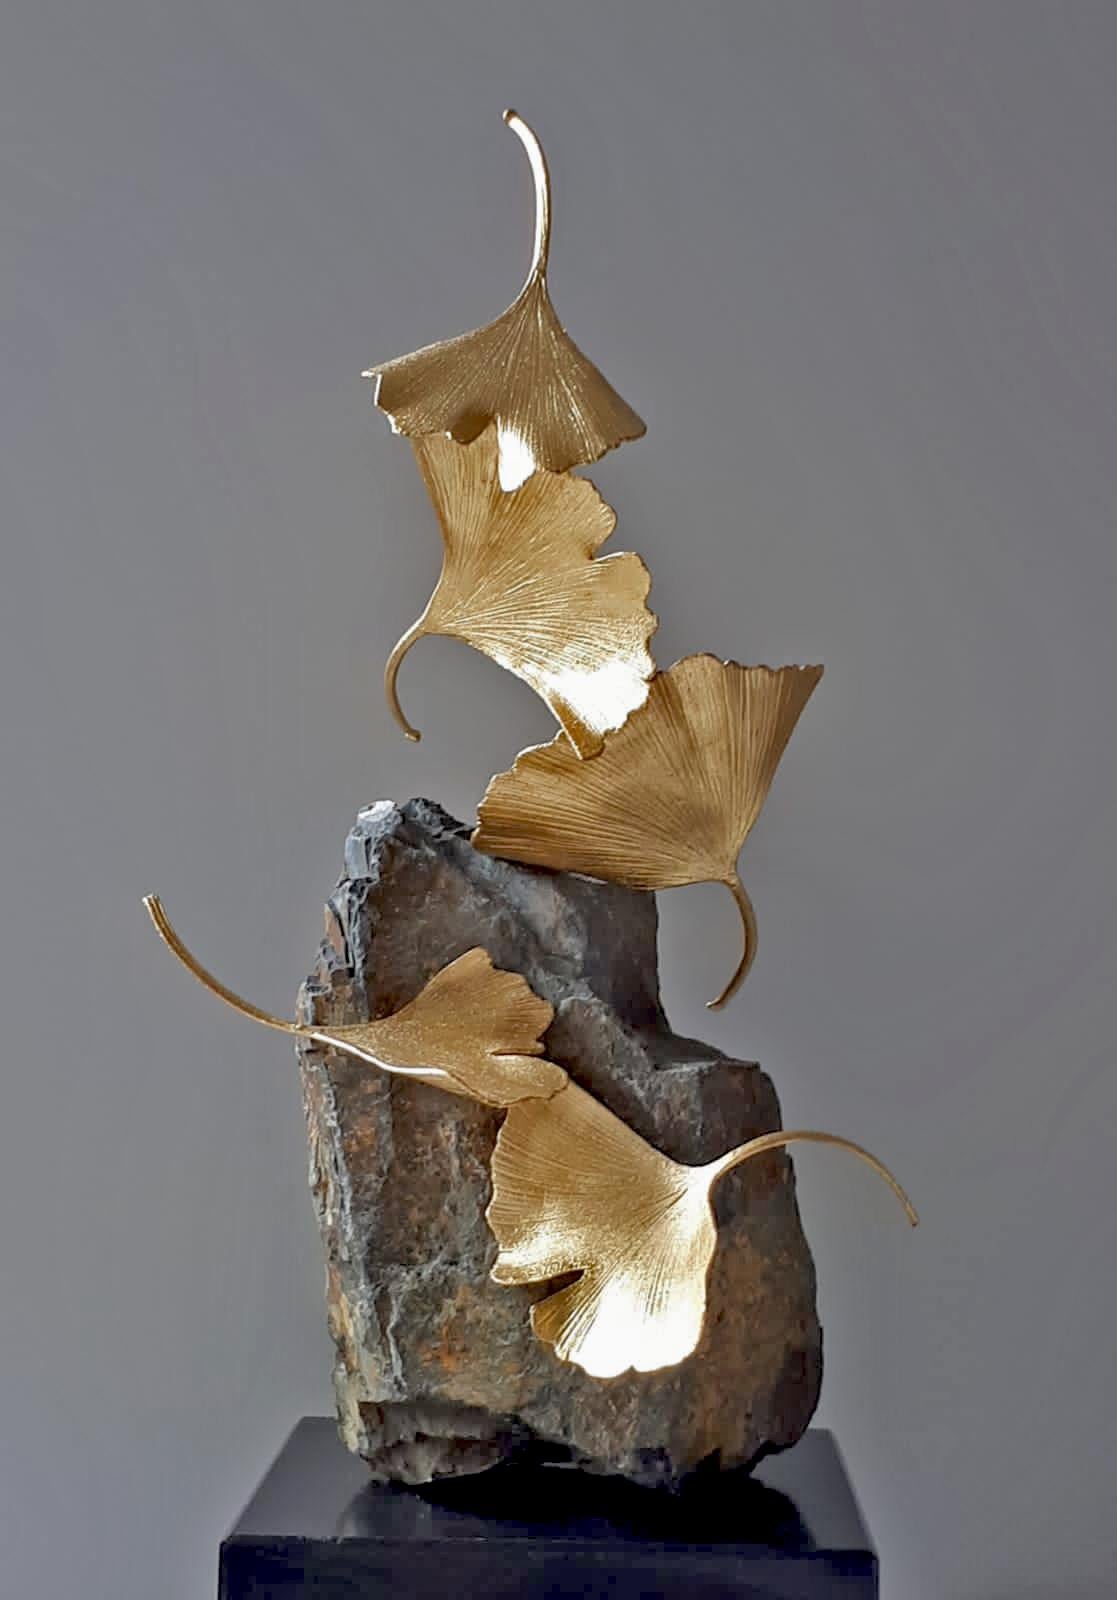 Artist: Kuno Vollet
Title: Stone Gingko 
Materials: Cast brass, gold leaf, Stone base

This small elegant original brass cast and gold leaf sculpture by German artist Kuno Vollet brings nature and energy into any art collection.
Each leaf is